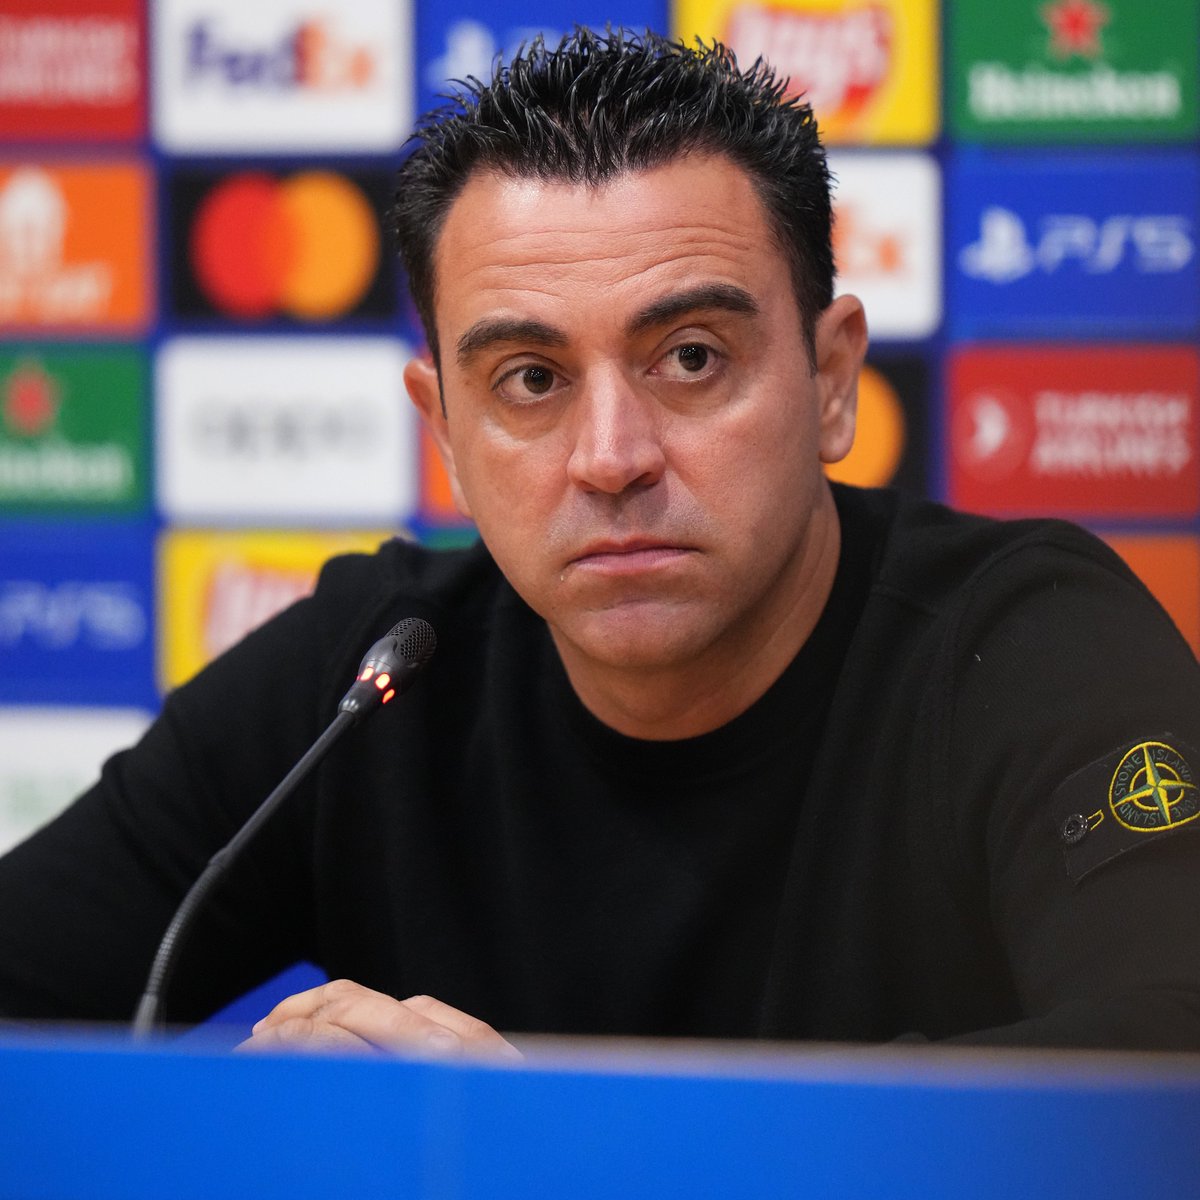 𝗕𝗥𝗘𝗔𝗞𝗜𝗡𝗚: Xavi has decided to STAY at Barcelona until 2025 😳 via @ffpolo 🗞️